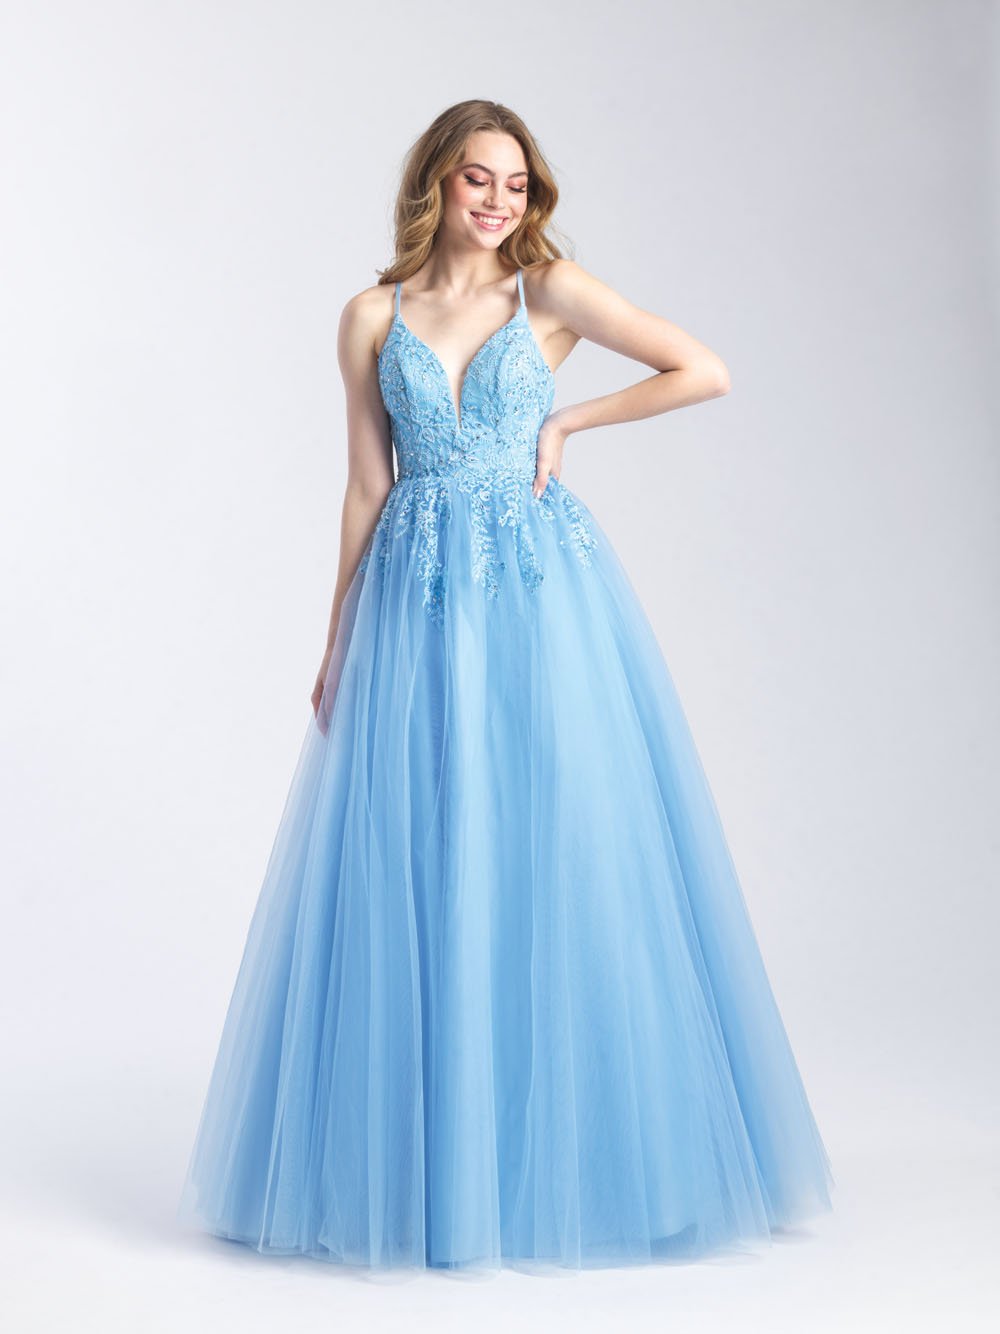 Madison James 20-344 dress images in these colors: Light Blue, Peach, Ivory.